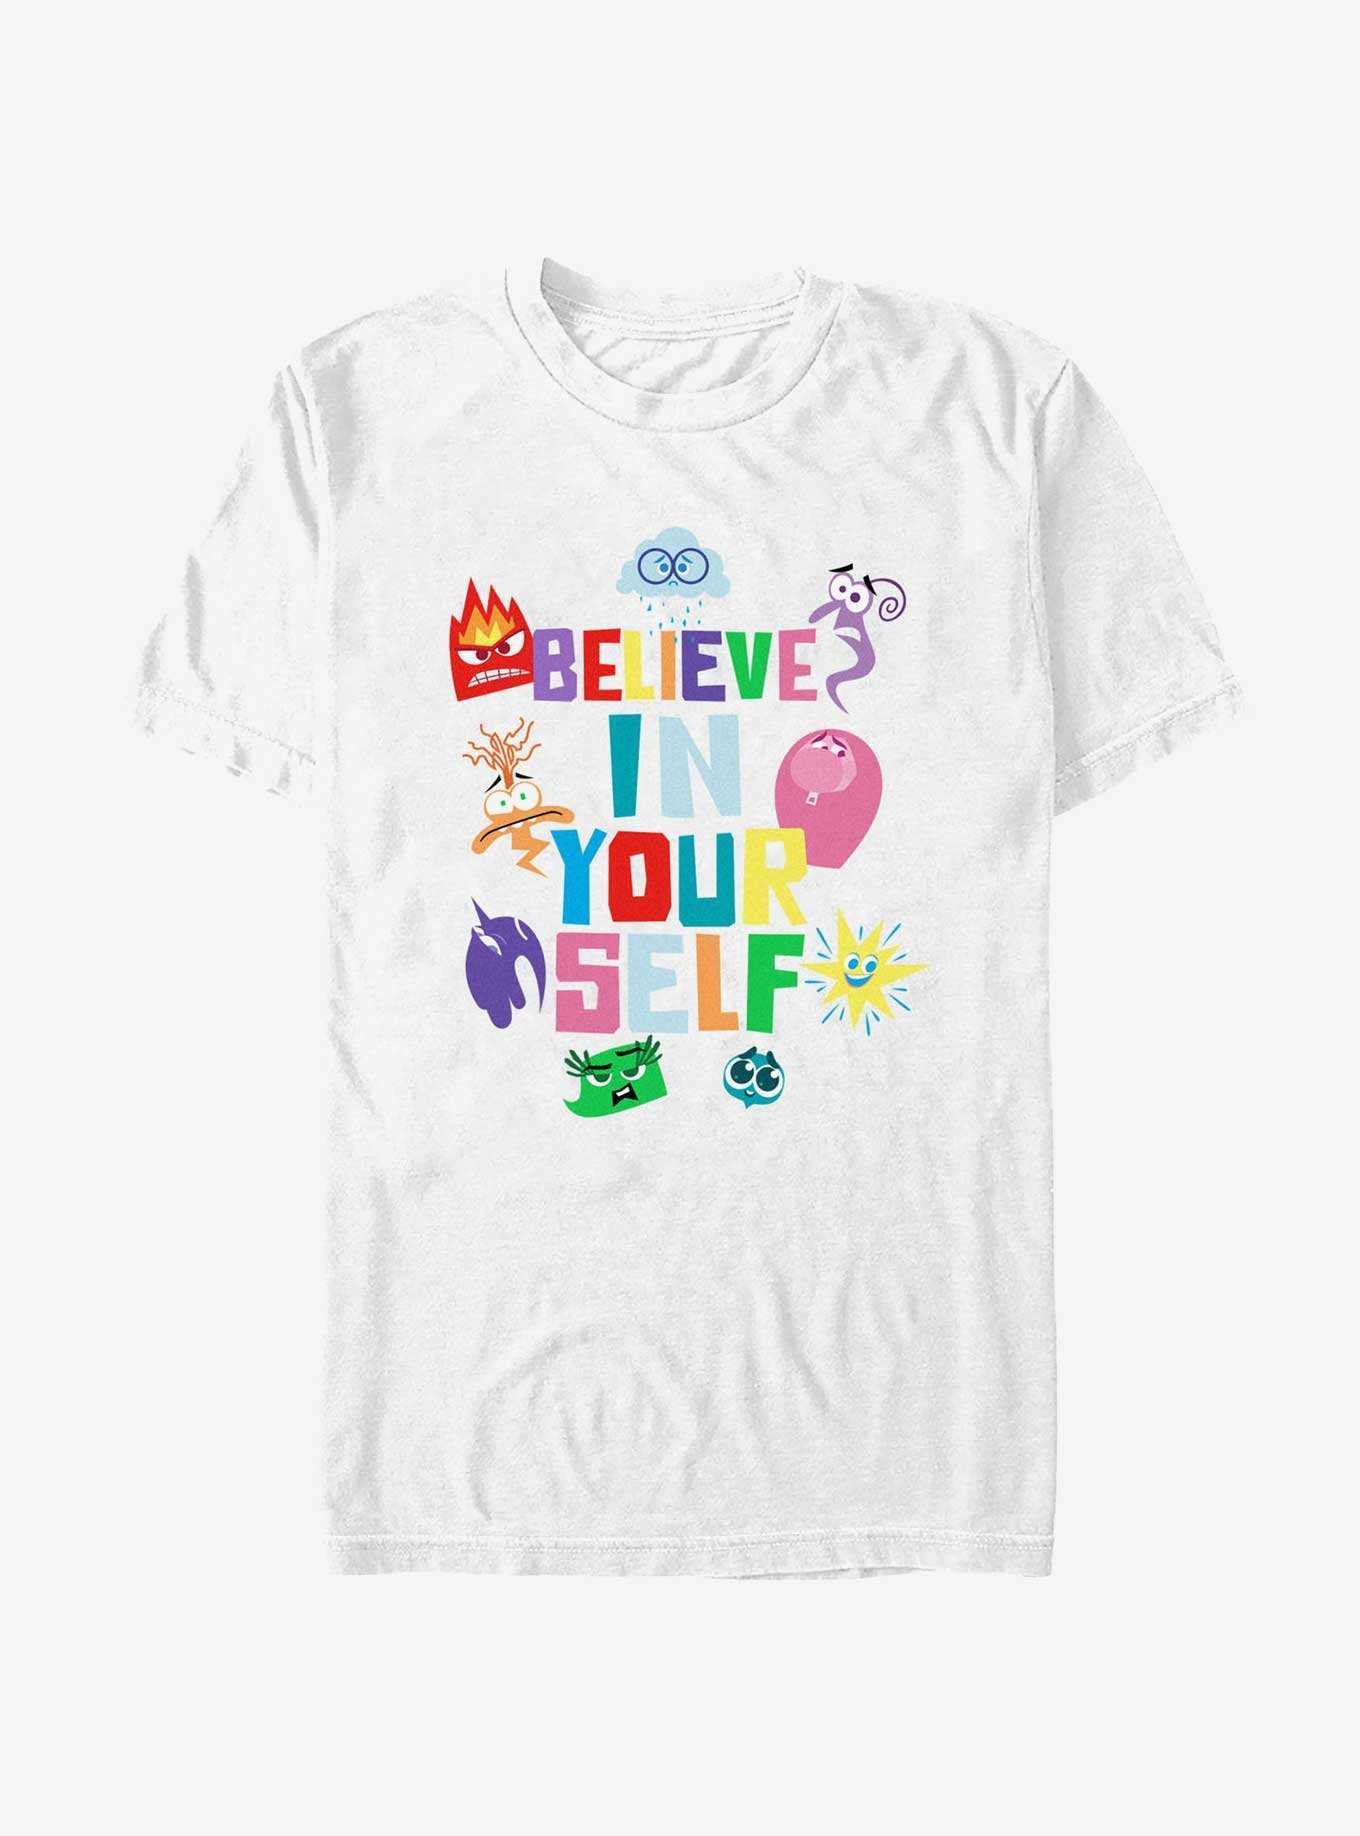 Disney Pixar Inside Out 2 Believe In Your Self T-Shirt, , hi-res